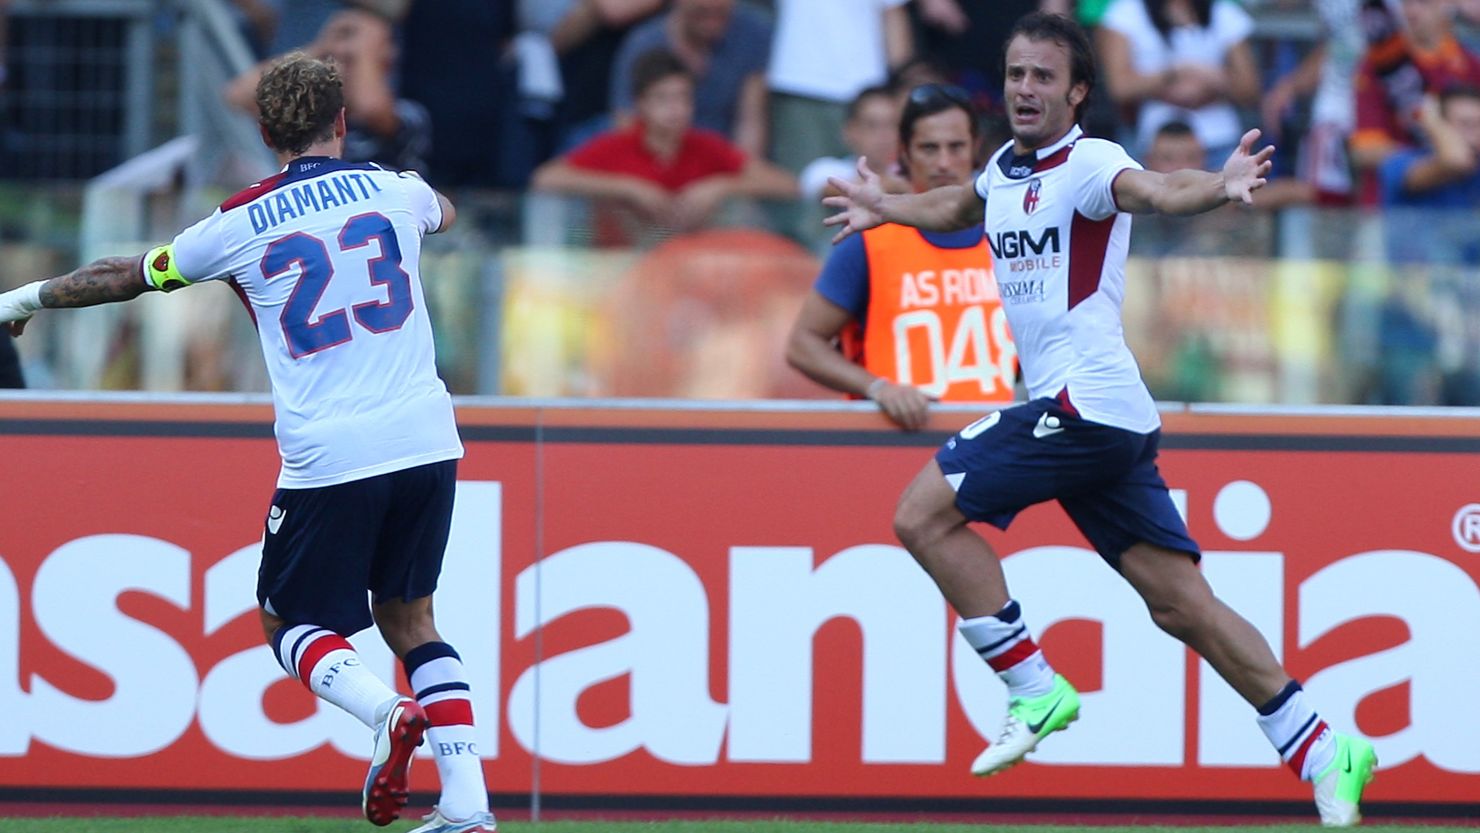 A brace from Alberto Gilardino (right) and a goal from Alessandro Diamanti (left) gave Bologna a win.